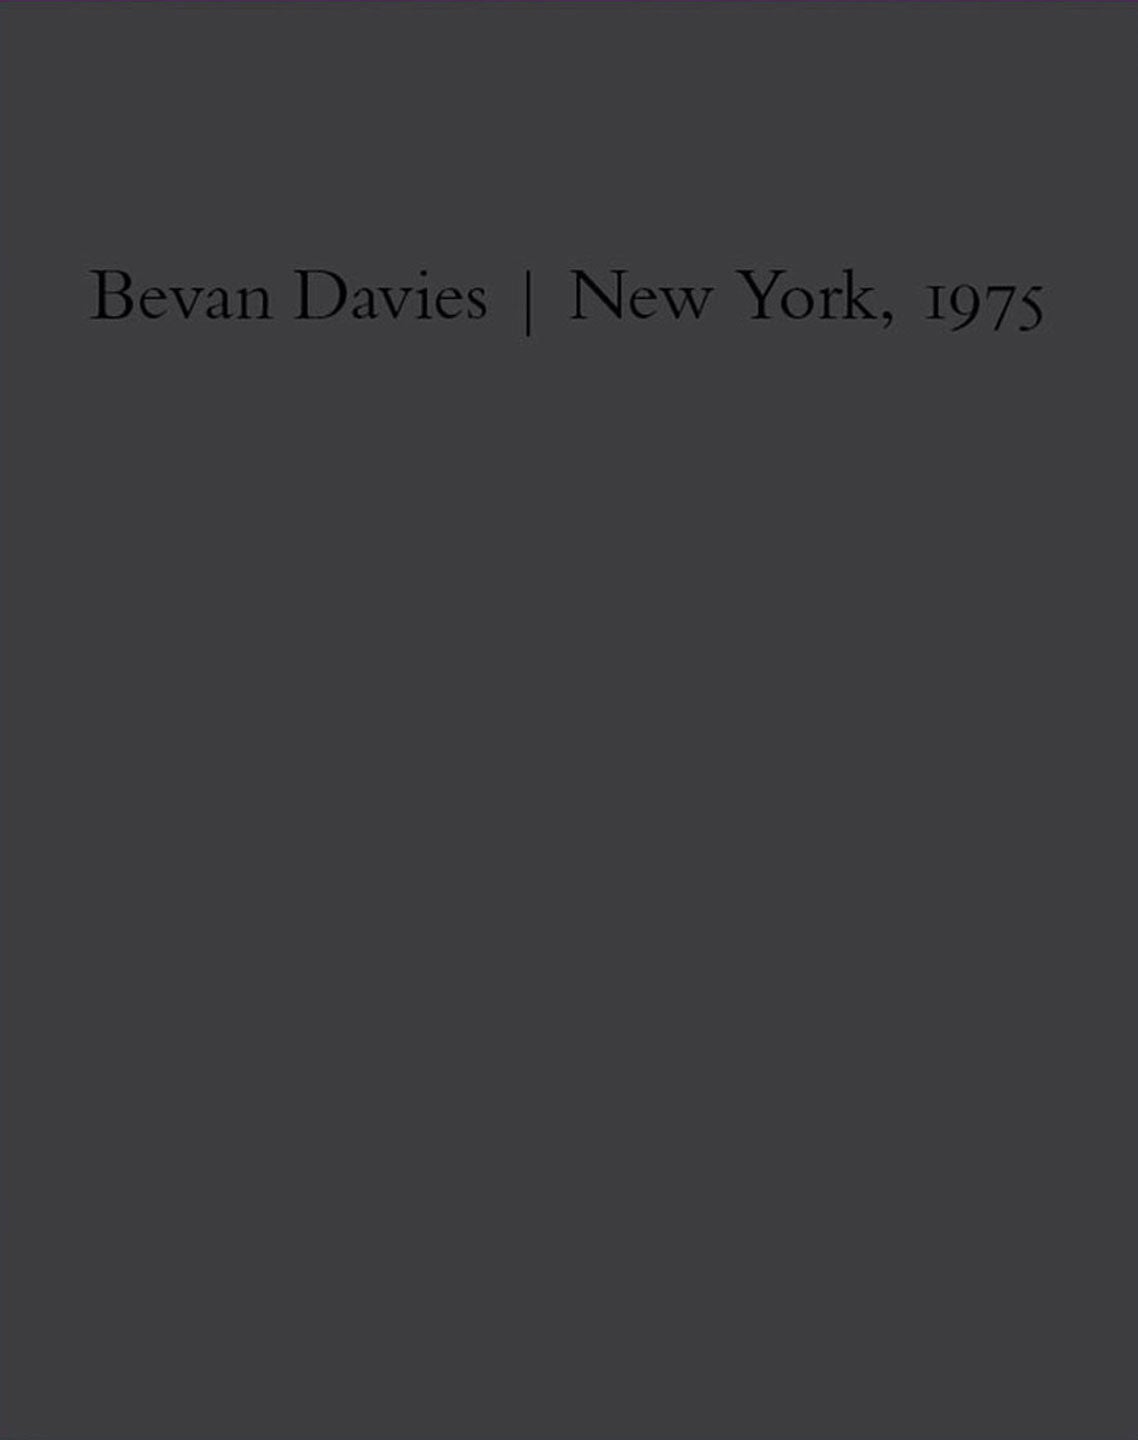 NZ Library #3: Bevan Davies: New York, 1975, Limited Edition (NZ Library - Set Three) [SIGNED]